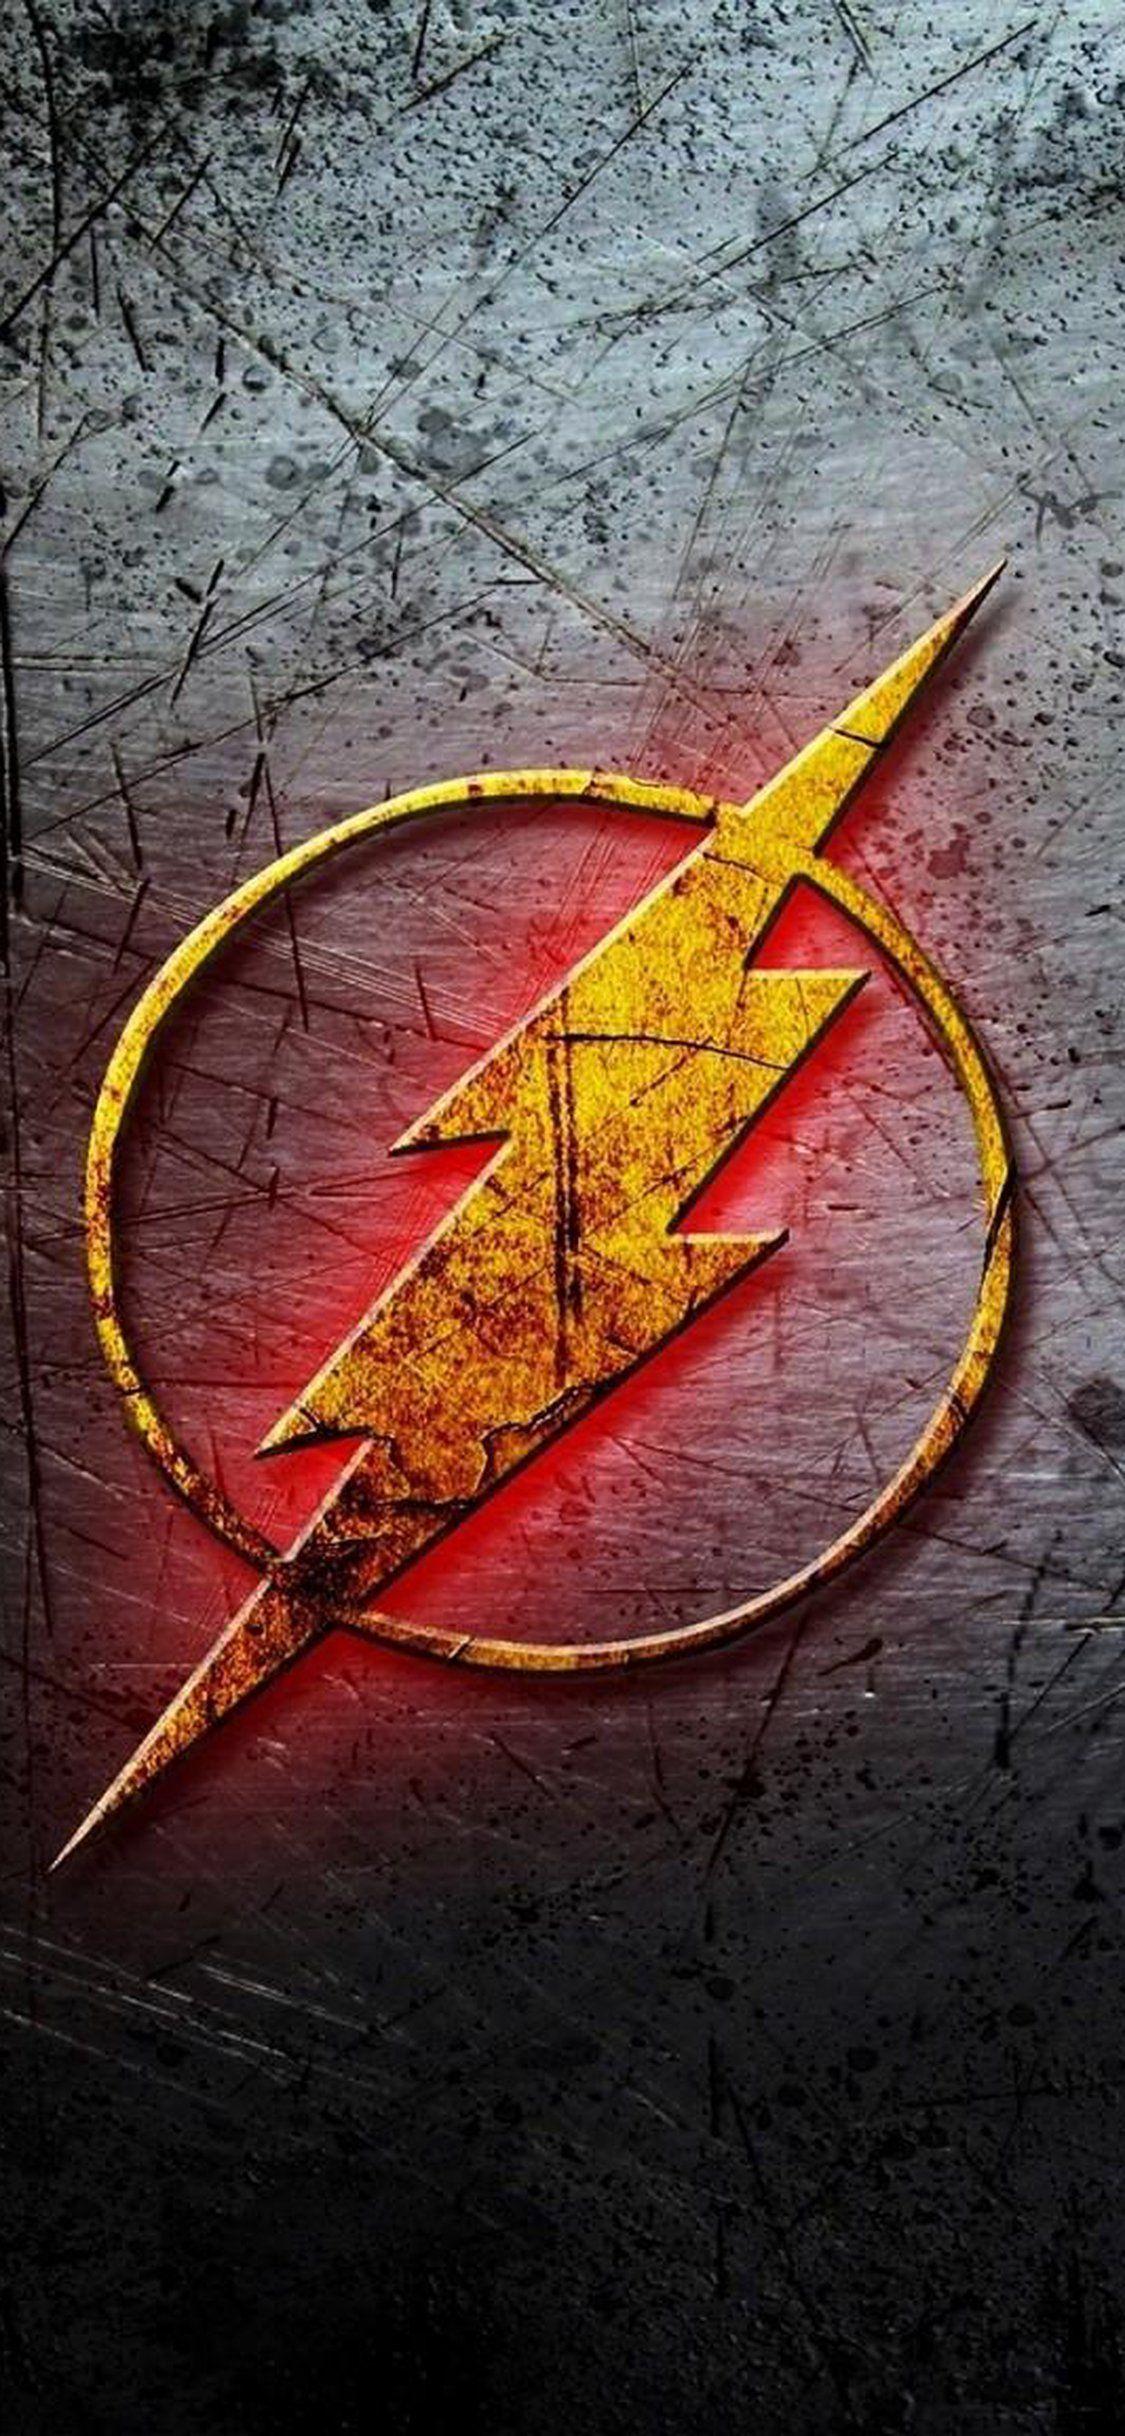 Flash Iphone Wallpapers